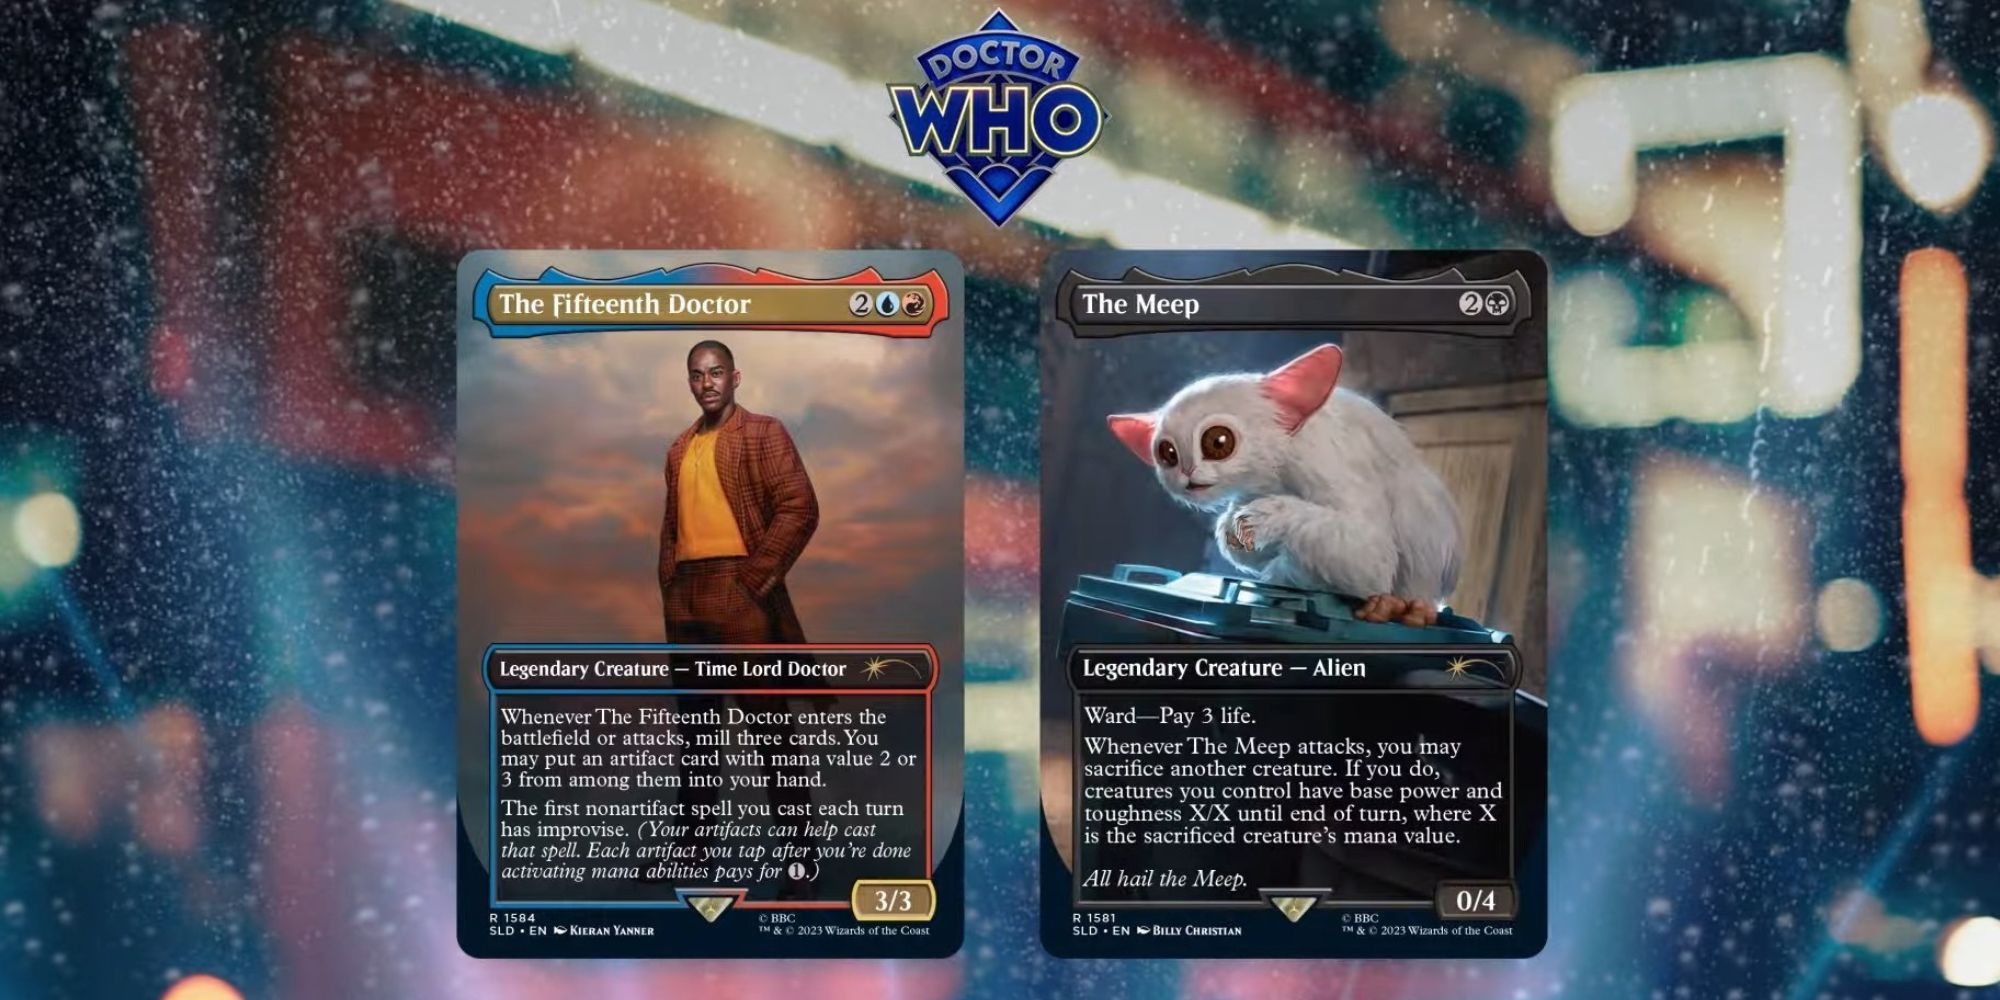 Doctor Who MTG Secret Lair Reveals The Meep And The Fifteenth Doctor